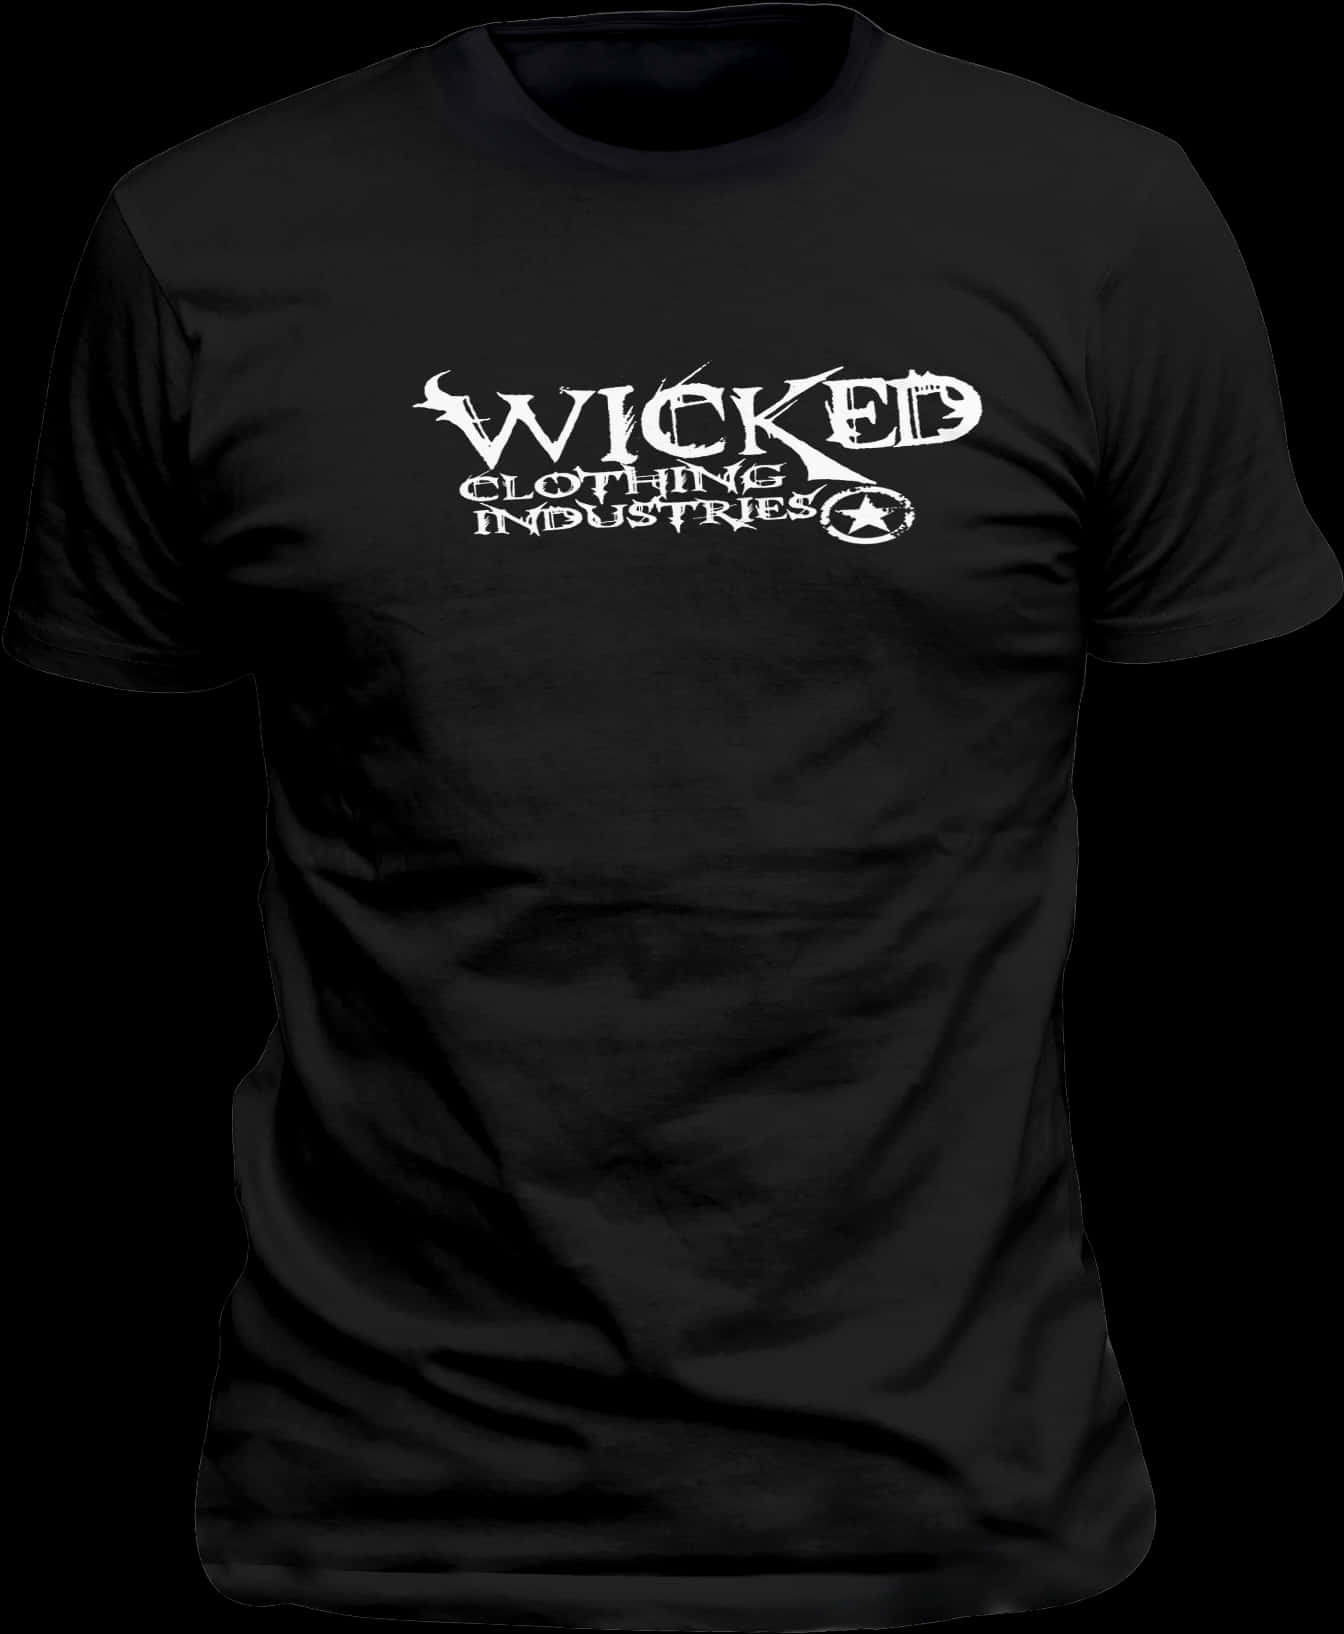 Black Wicked Clothing Industries Shirt